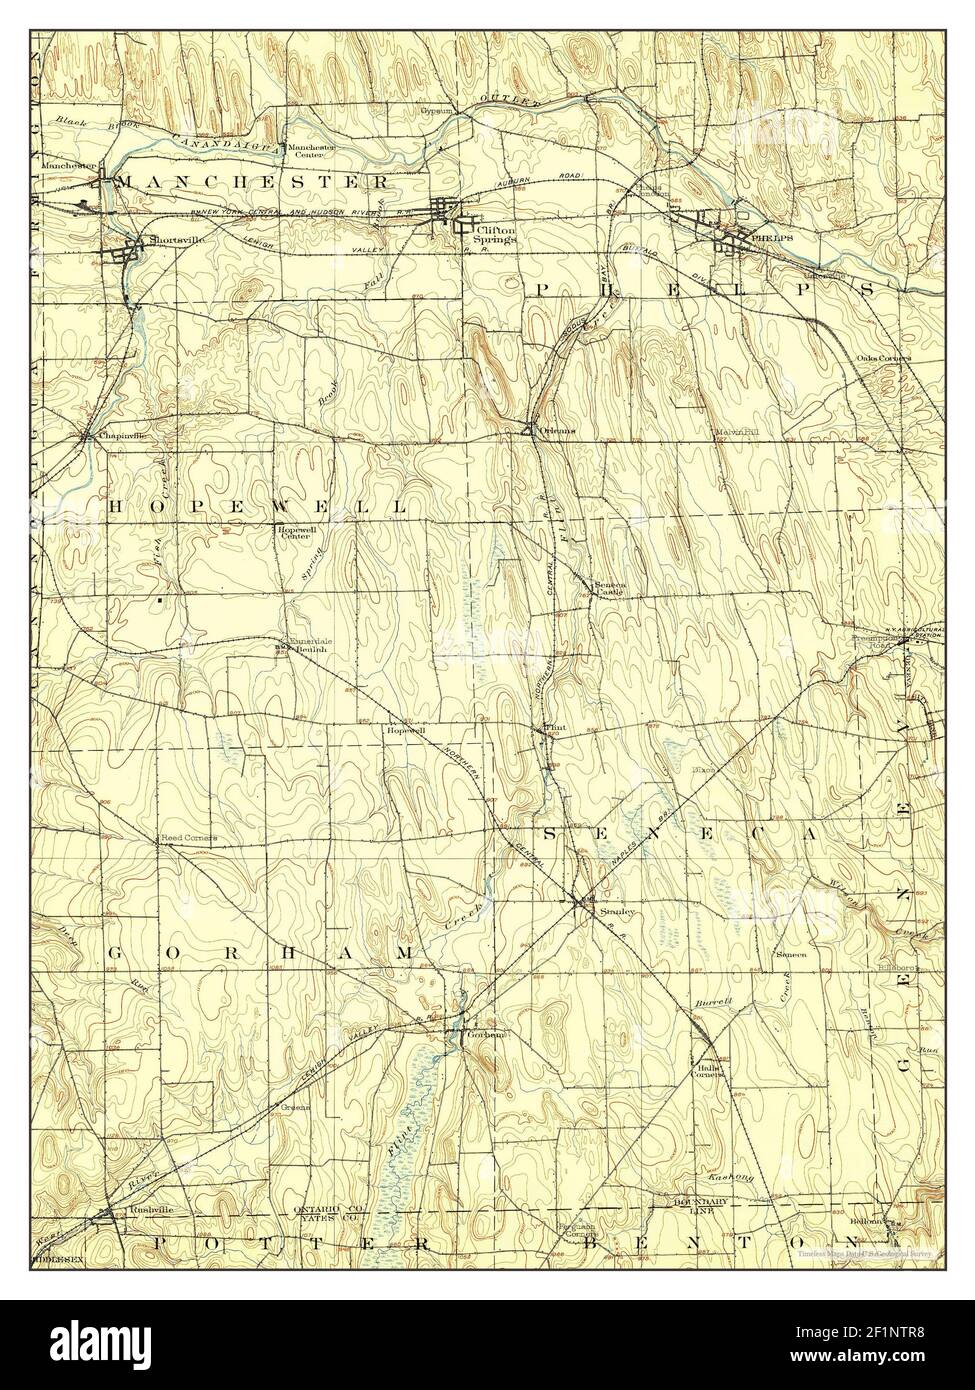 Phelps, New York, map 1902, 1:62500, United States of America by Timeless Maps, data U.S. Geological Survey Stock Photo